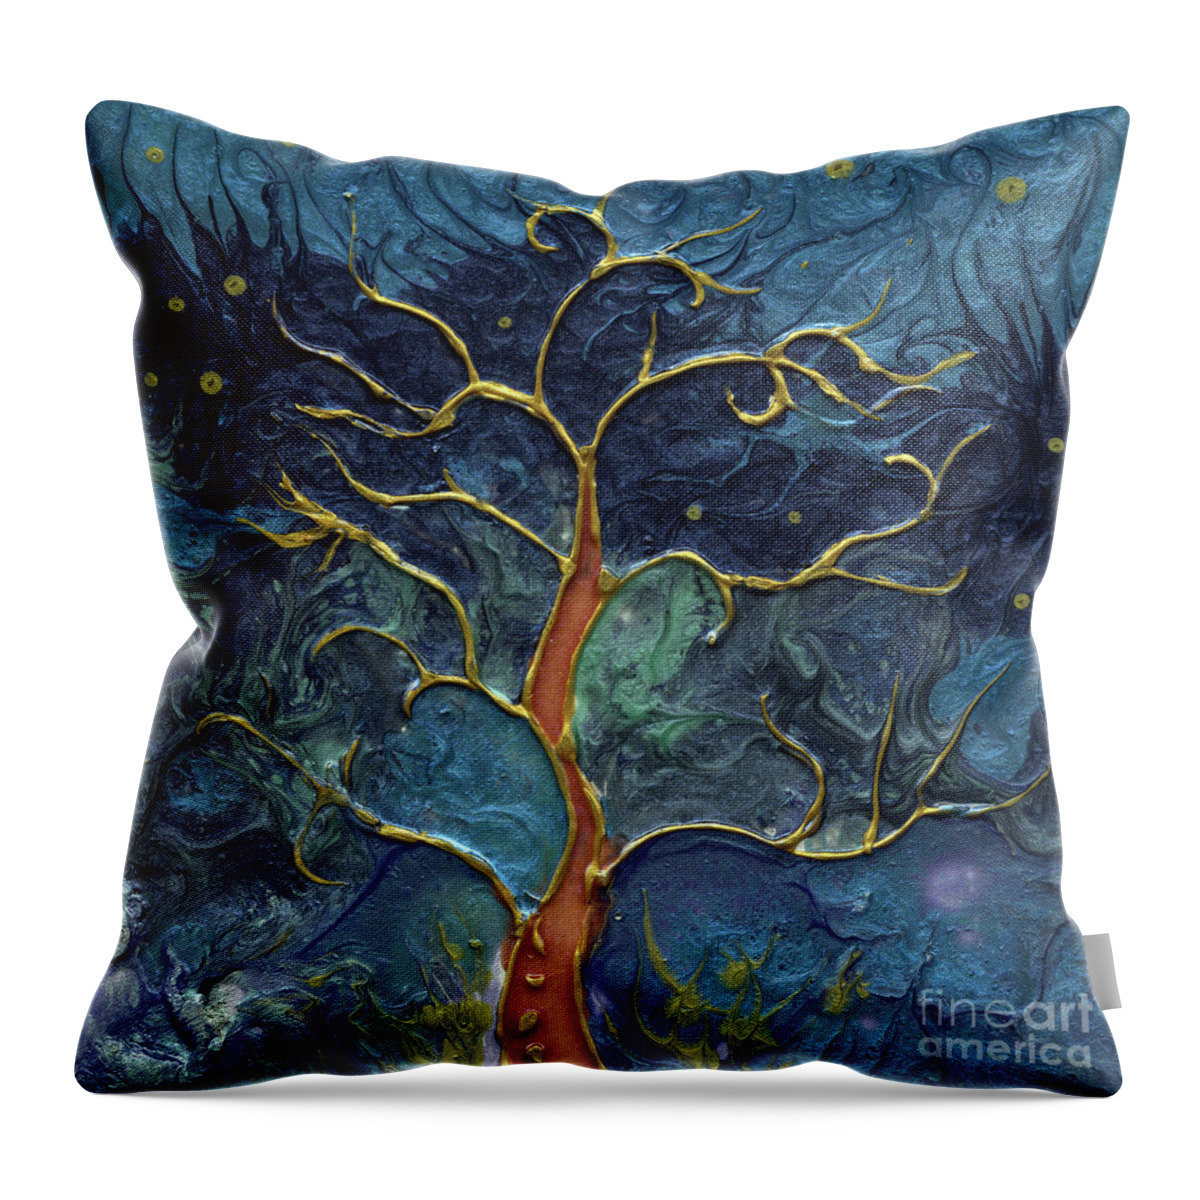 Abstract Throw Pillow featuring the painting Tree of life by Ang El